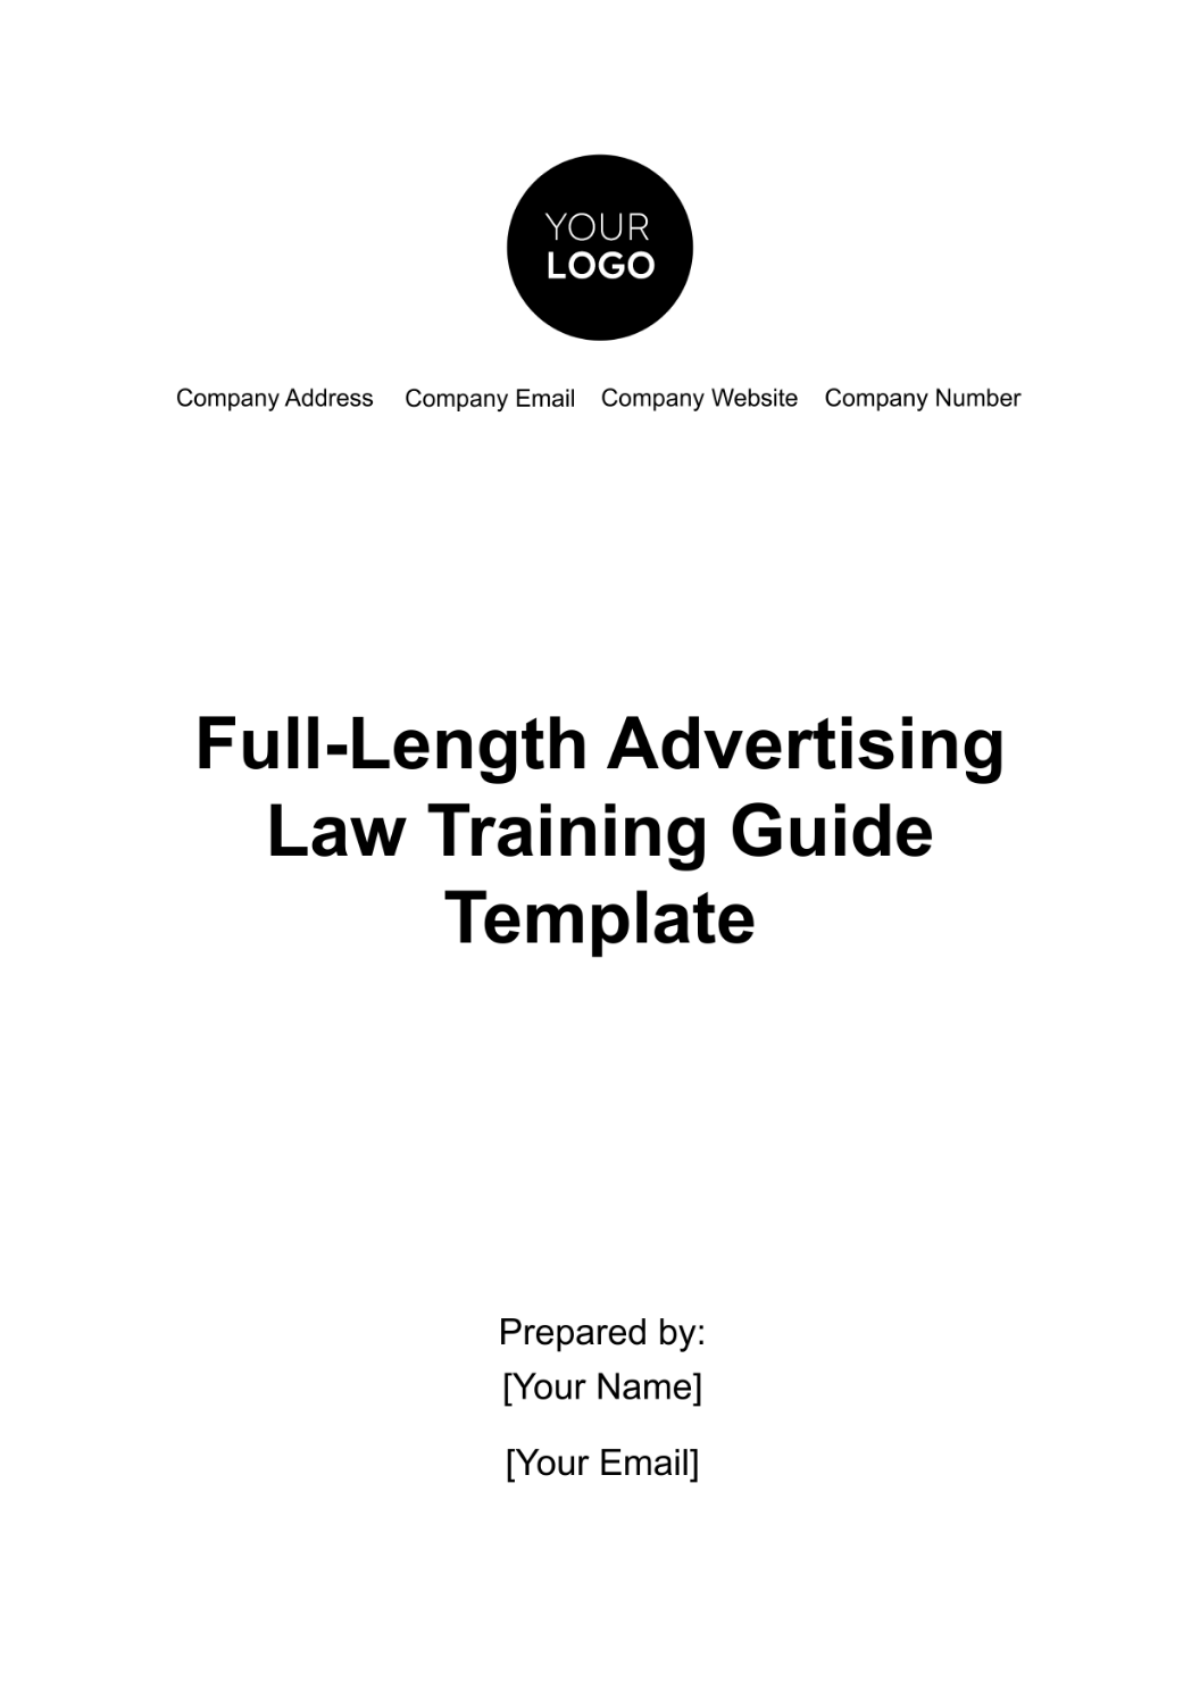 Free Full-Length Advertising Law Training Guide Template